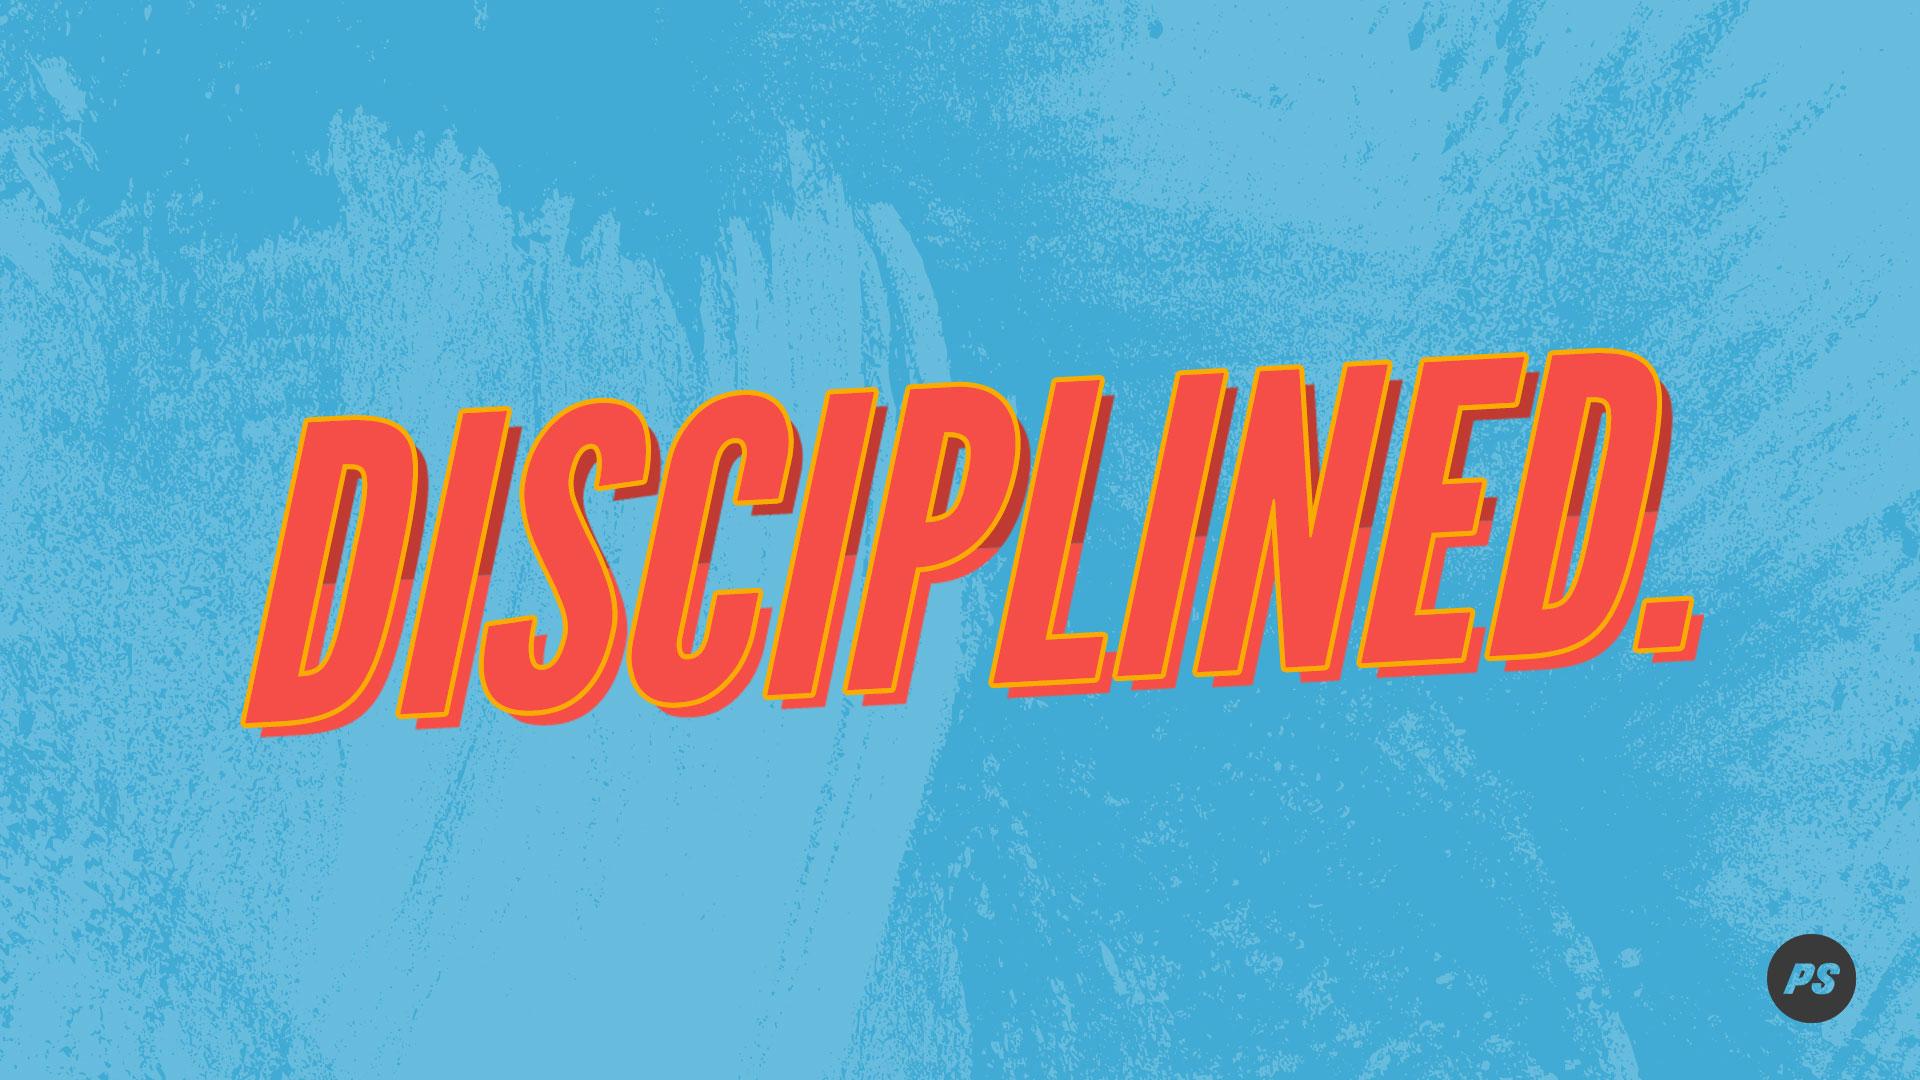 Featured image for “Disciplined”